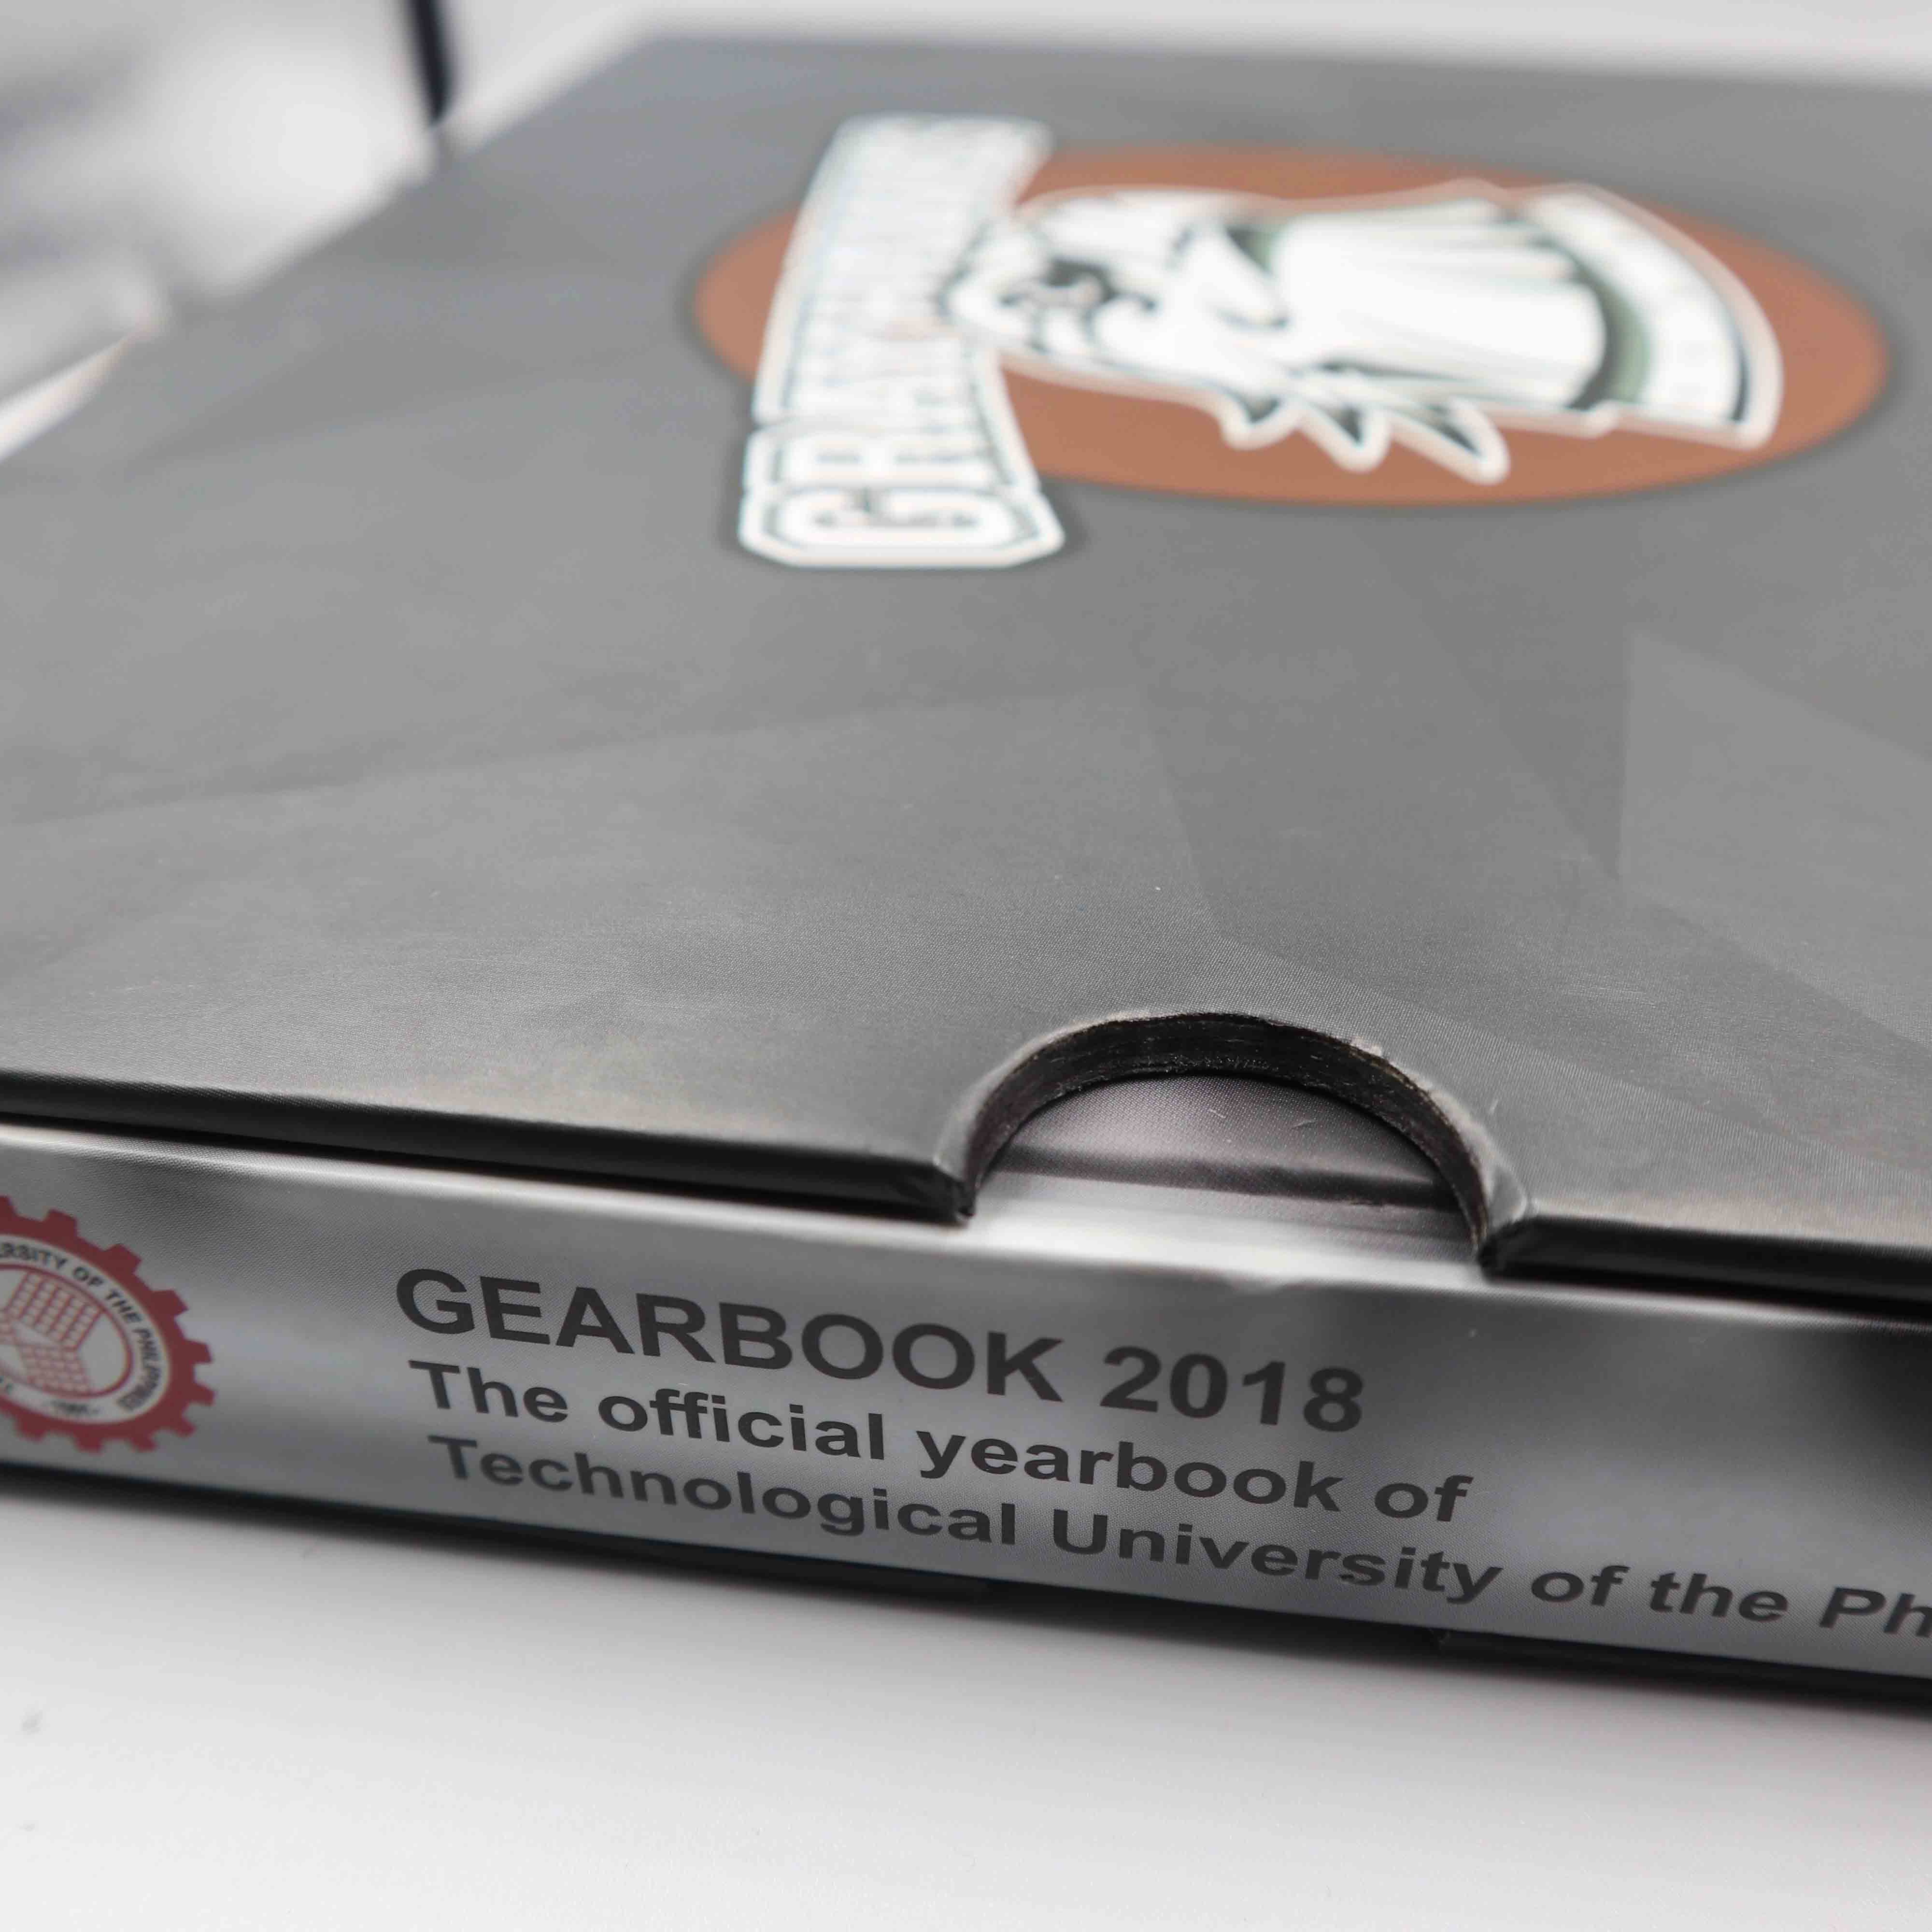 Technological University of the Philippines 2018 Gearbook Yearbook #vjgraphicsprinting #growthroughprint #offsetprinting #yearbooks — with Technological University of the Philippines- Taguig Extension Services, Technological University Of The Philippines-Cavite, TECHNOLOGICAL UNIVERSITY OF THE PHILIPPINES - BSIE-HE (BATCH O9'), Technological University of the Philippines - Taguig Campus and TUP-Taguig Campus